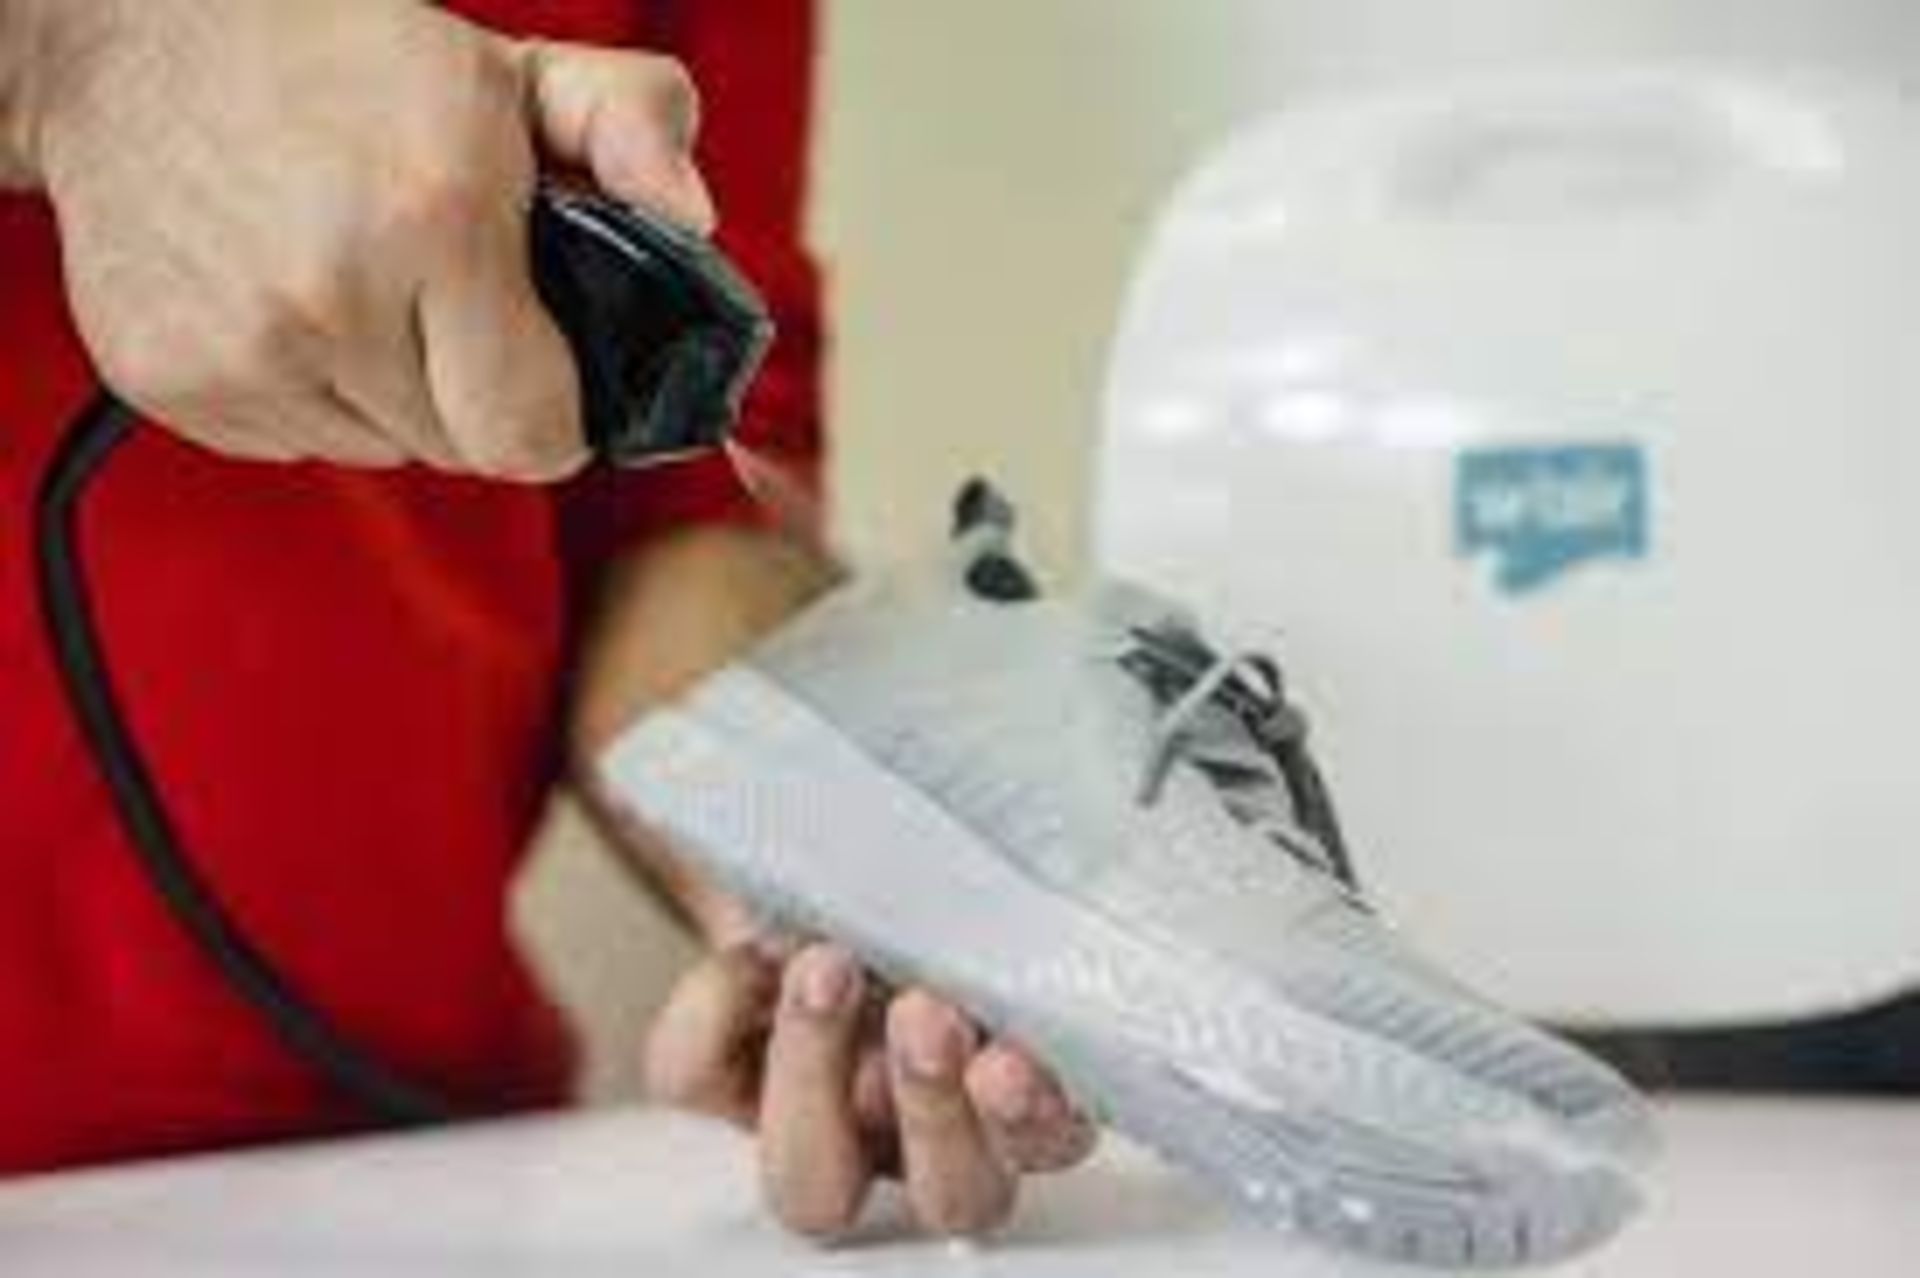 20 X BRAND NEW W'AIR SNEAKER CLEANING SYSTEMS RRP £299, The w'air uses hydrodynamic technology - Bild 3 aus 6